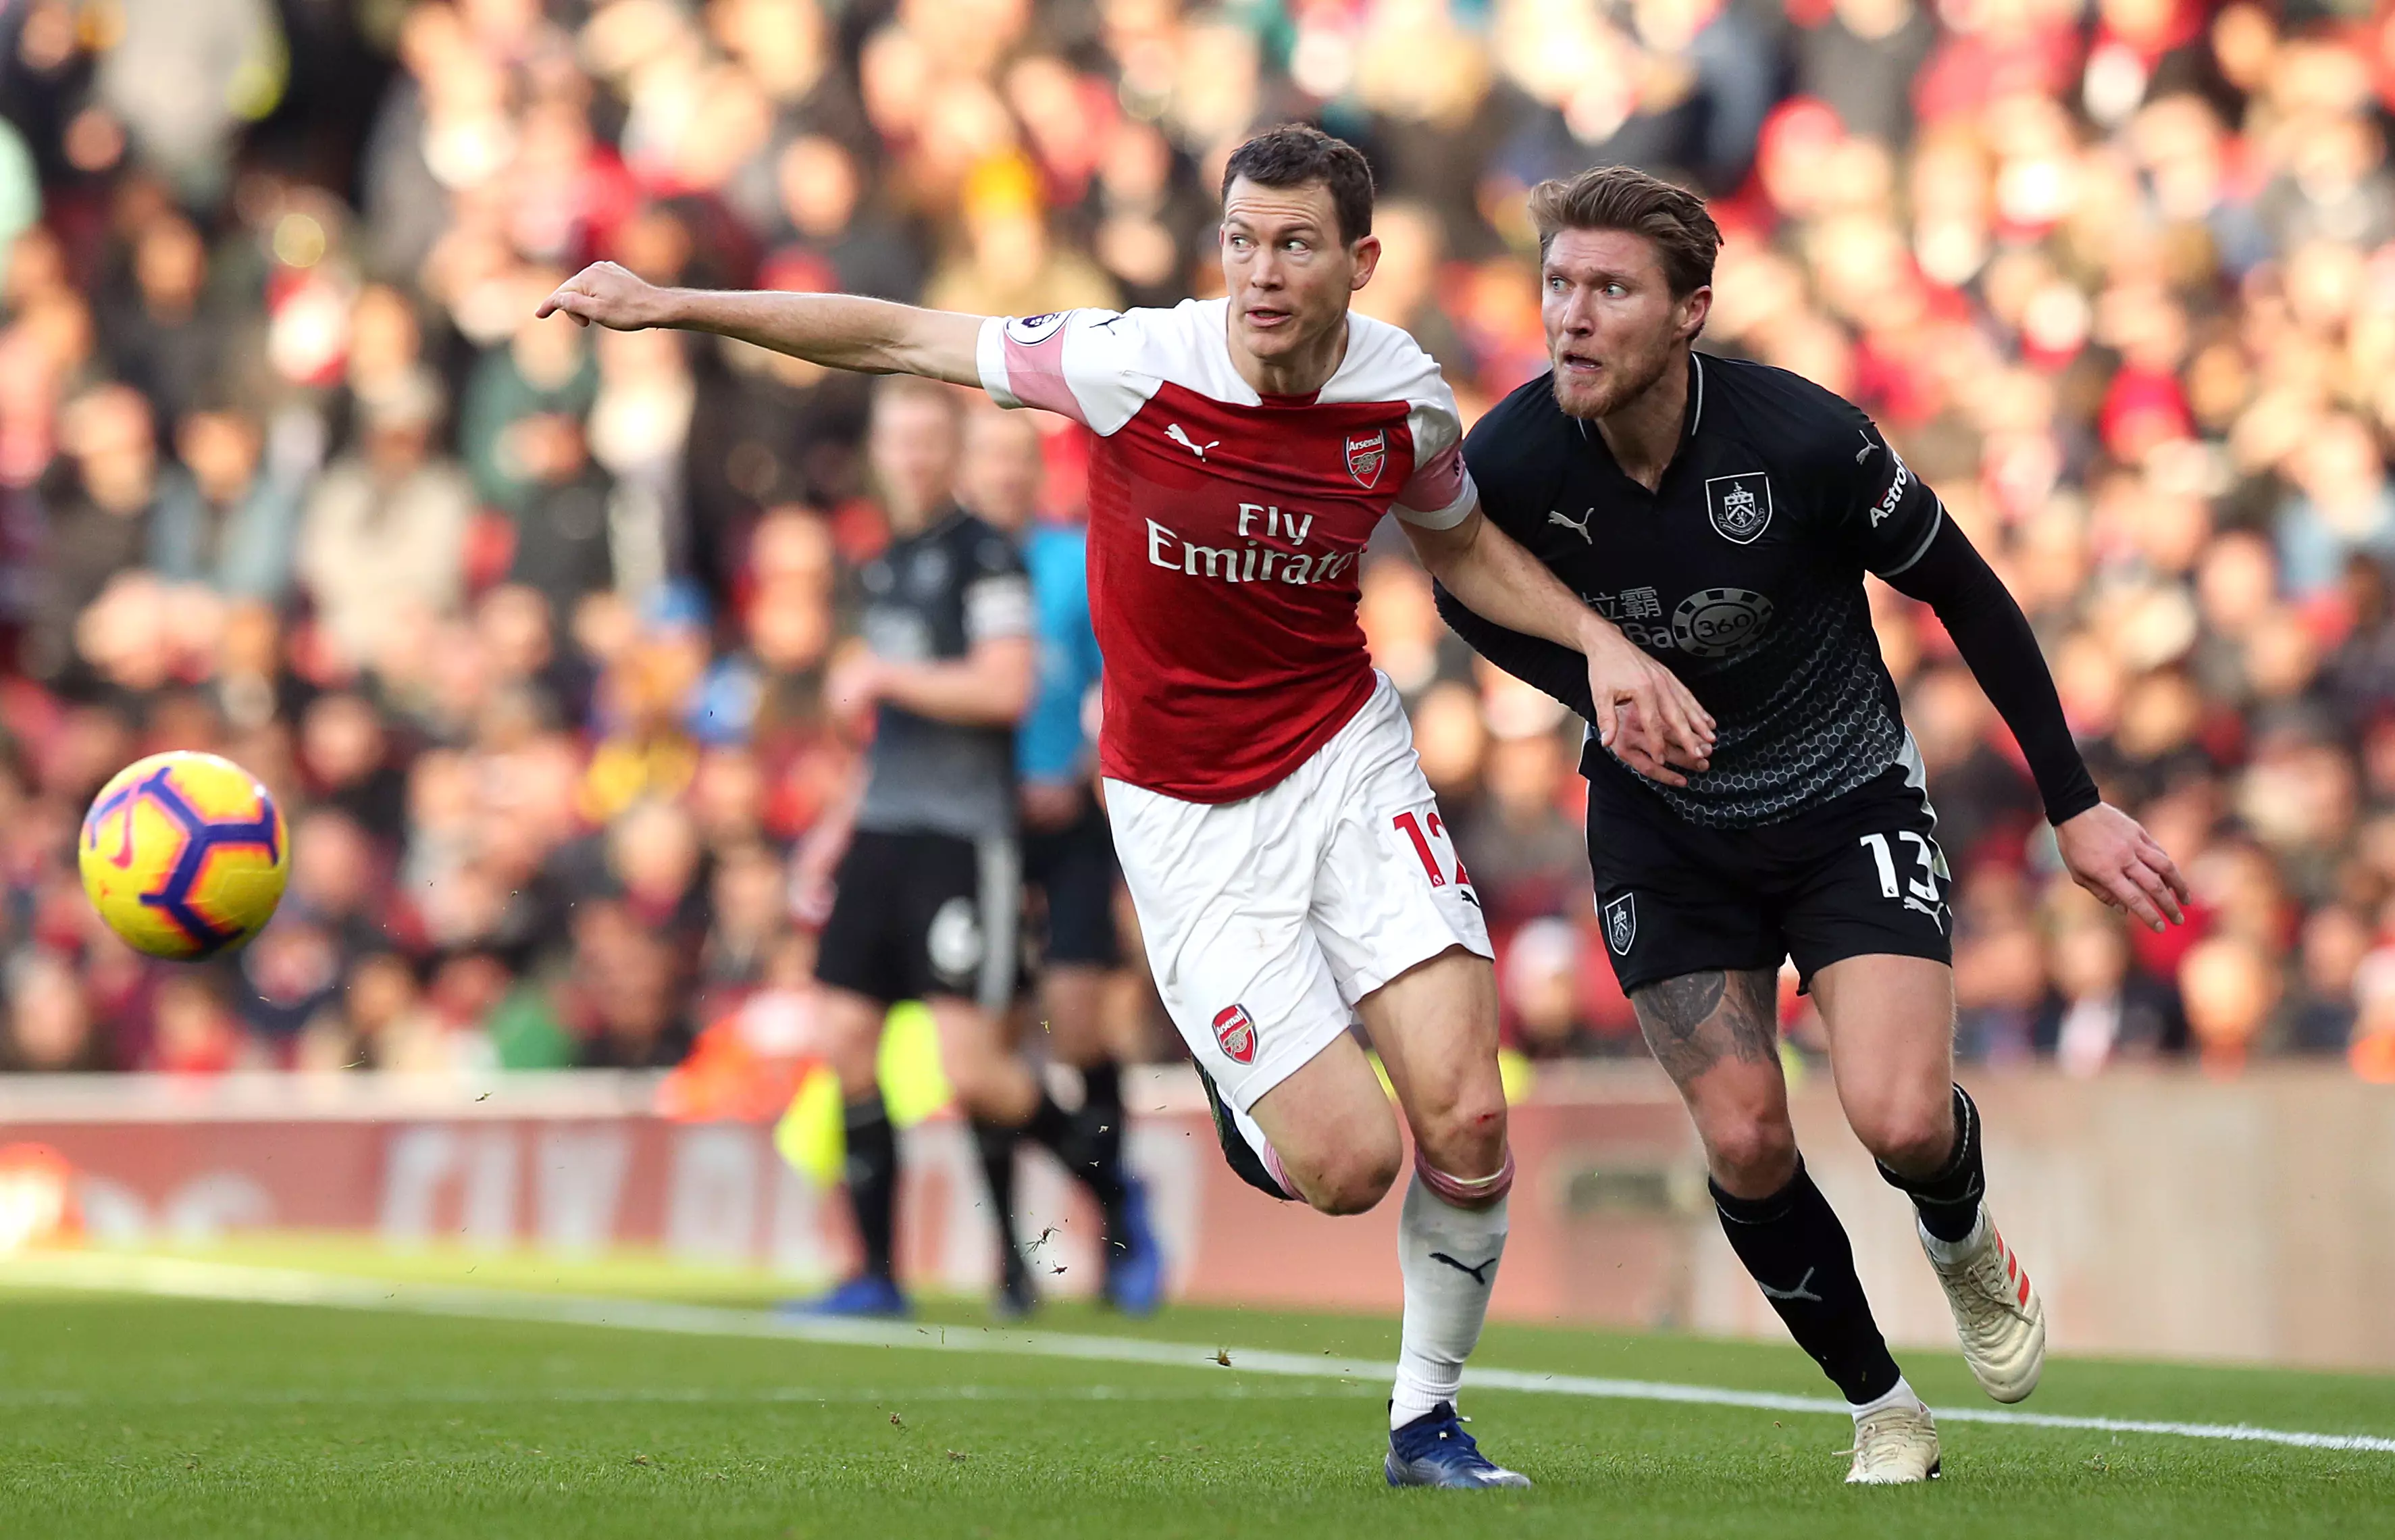 Lichtsteiner during his spell in the Premier League. Image: PA Images